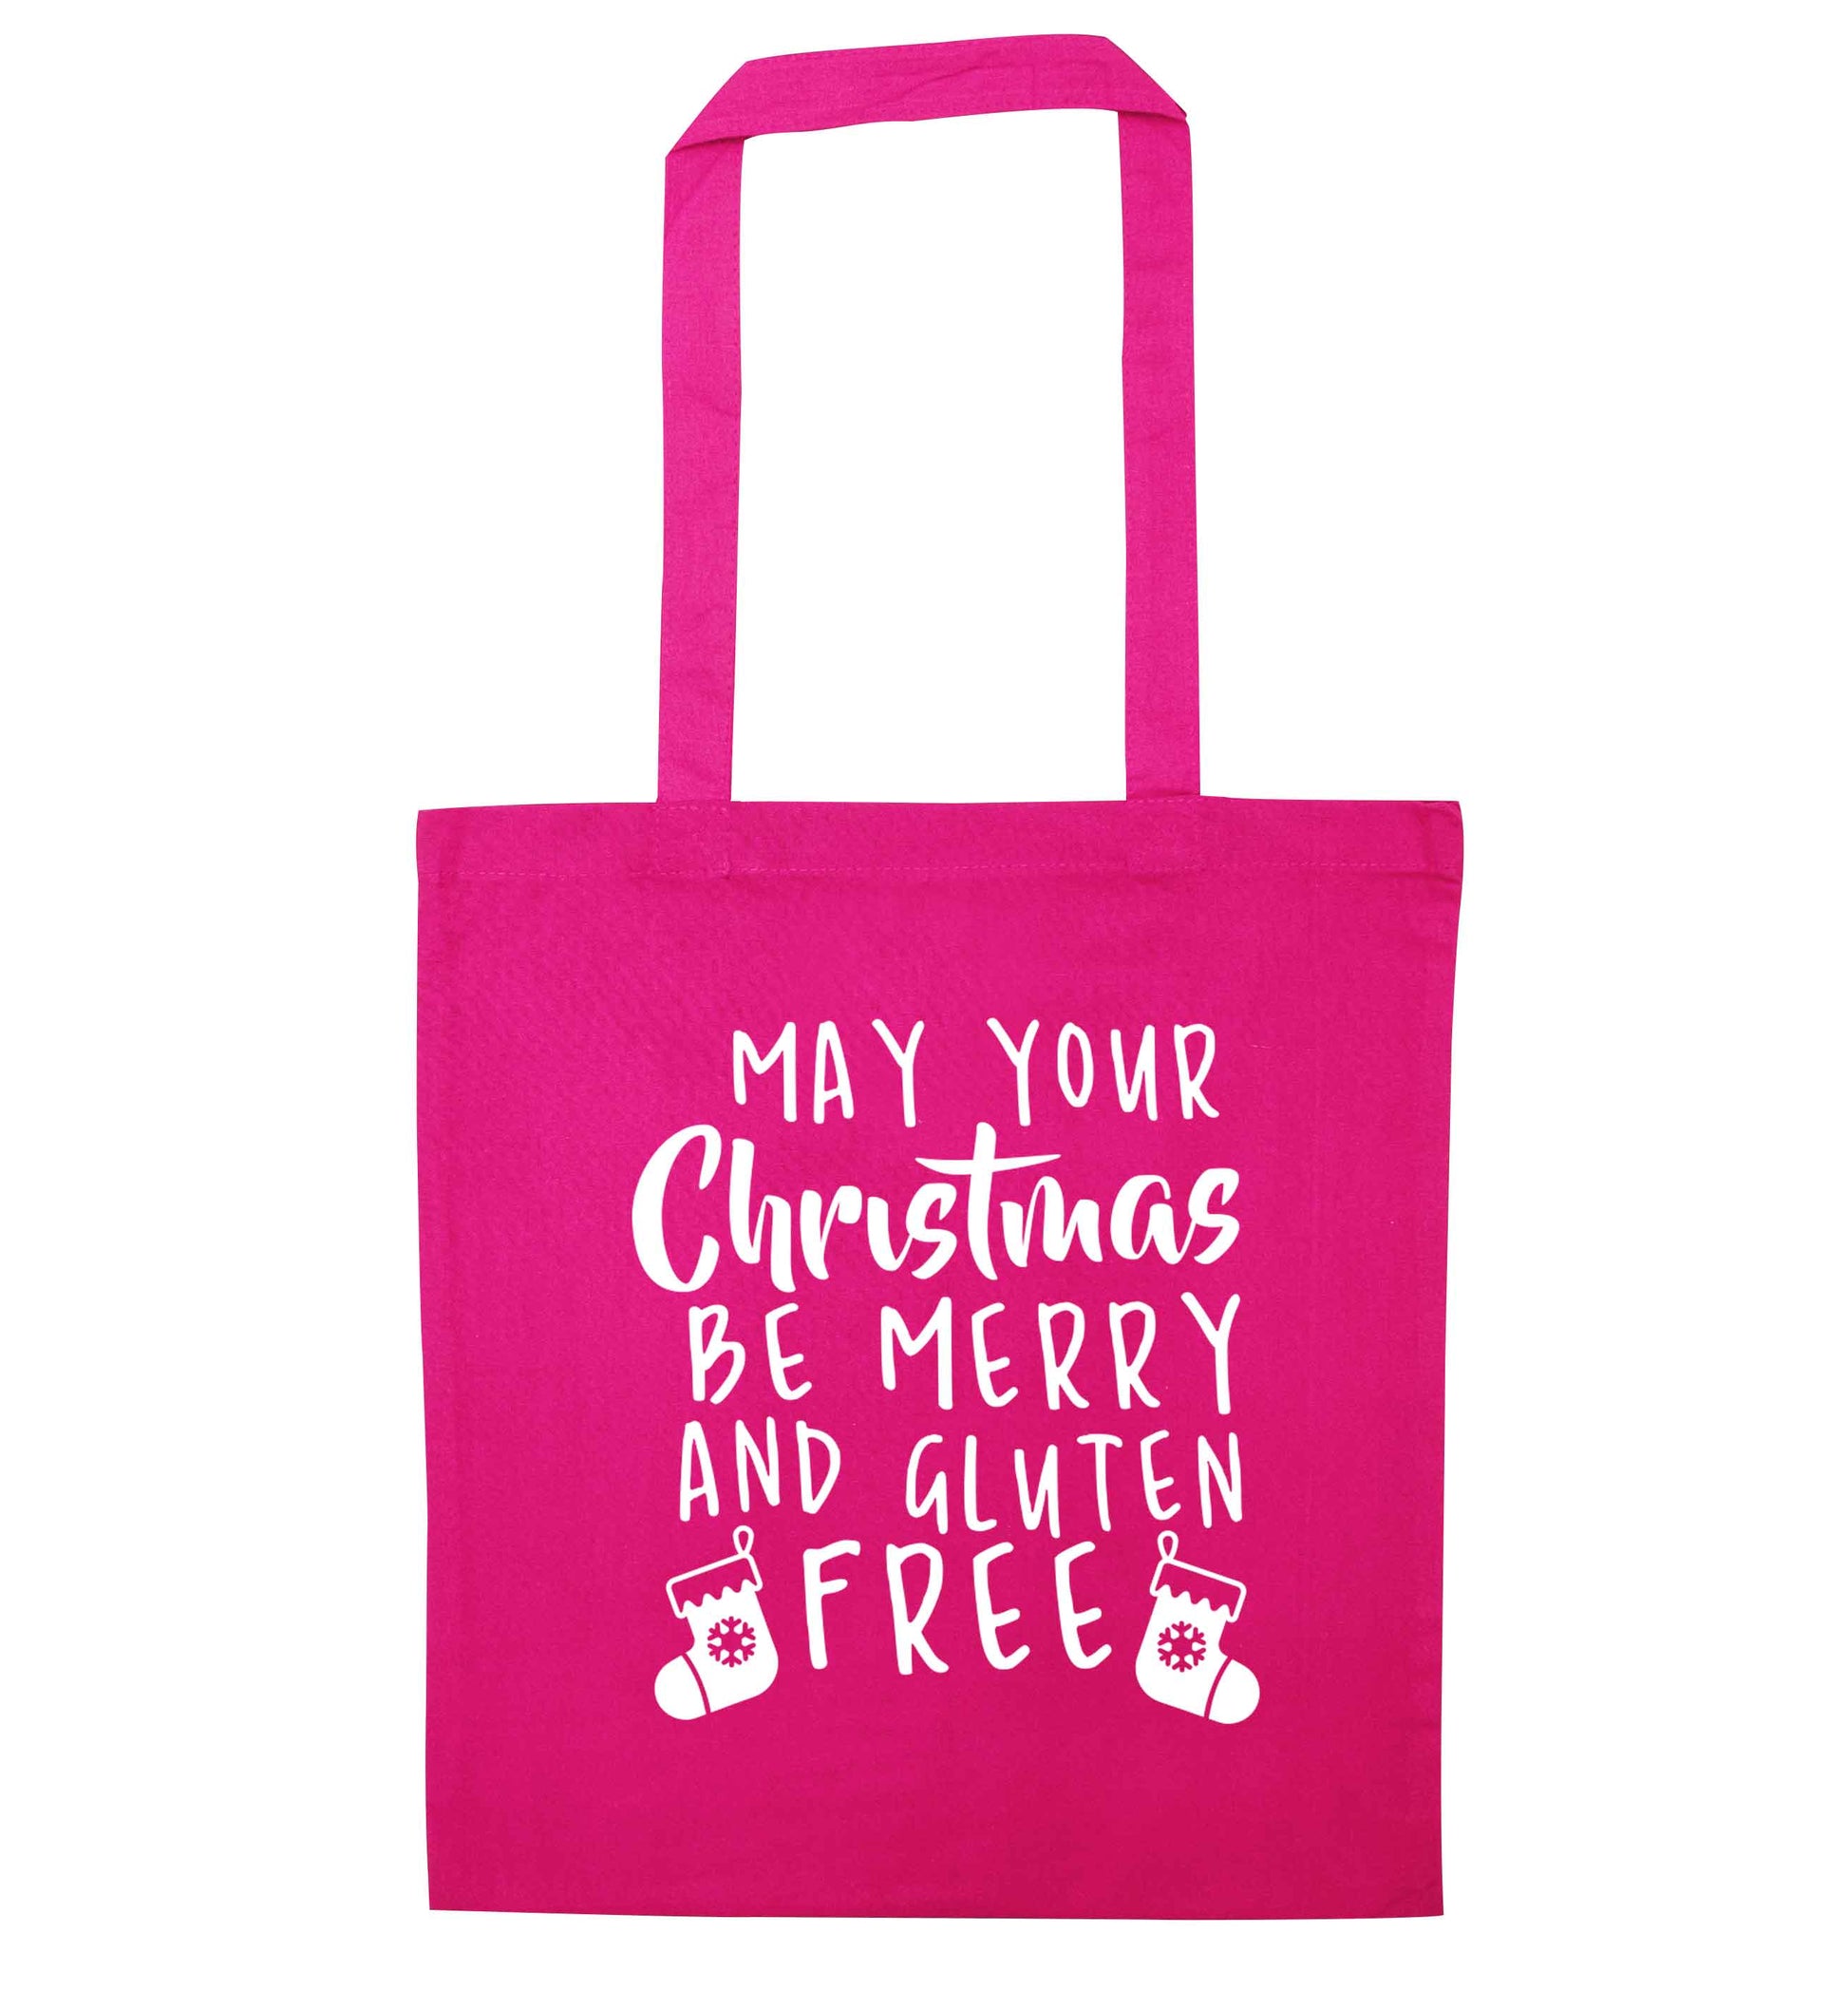 May your Christmas be merry and gluten free pink tote bag